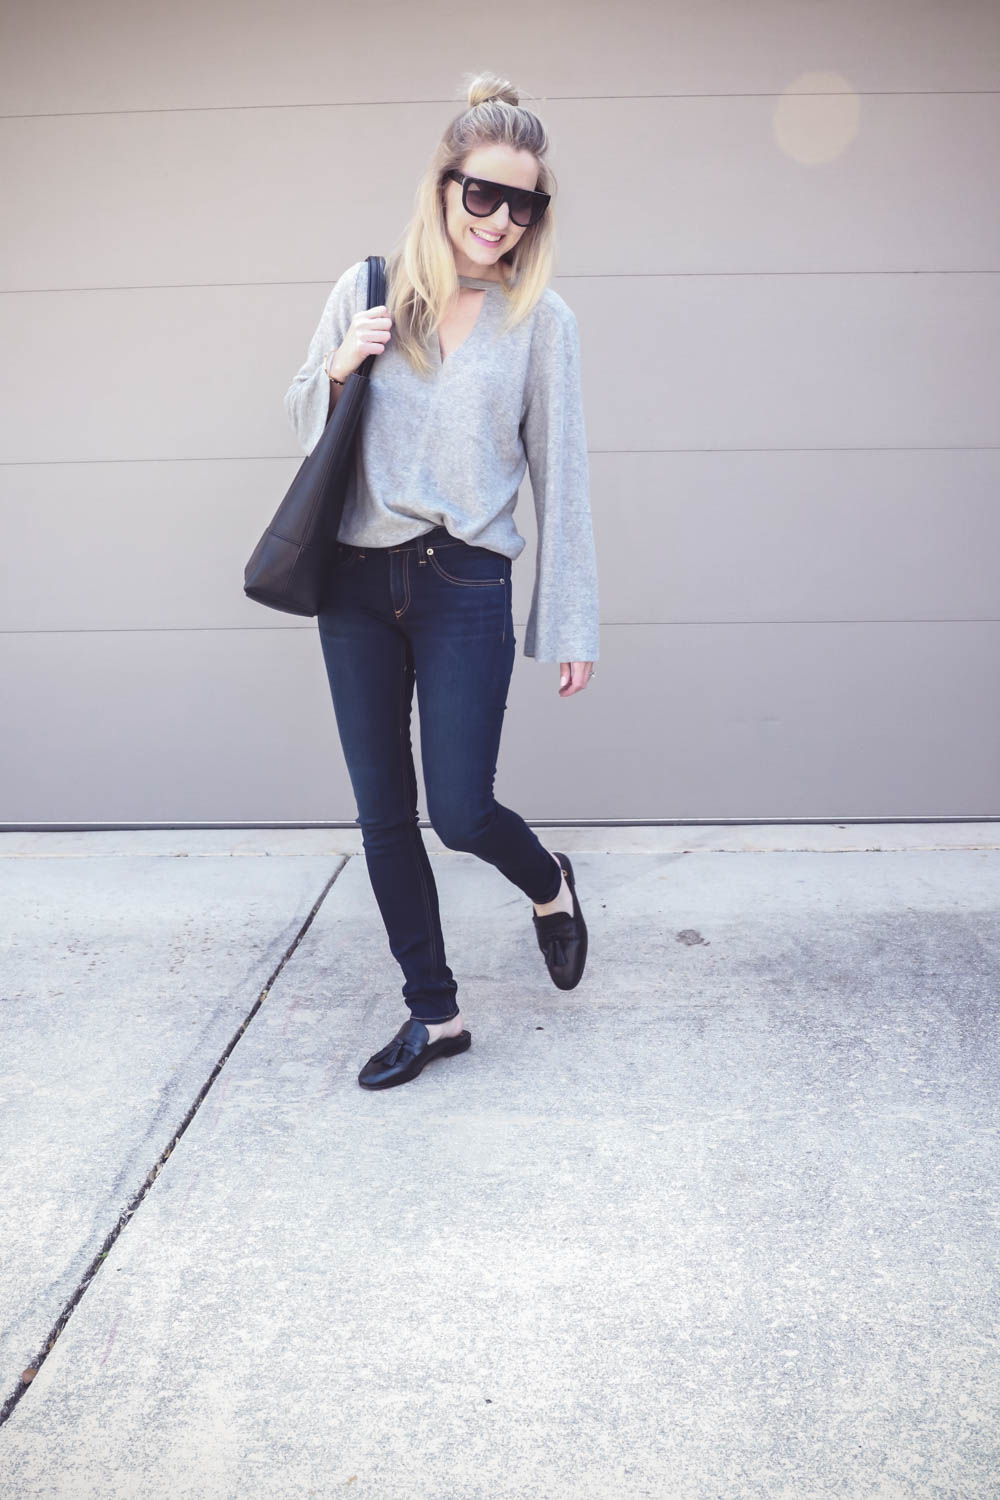 Dark wash skinny jeans called Bedford by Rag & Bone worn by Erin Busbee, BusbeeStyle.com, San Antonio, Texas lifestyle and fashion blogger giving wardrobe tips for women over 40